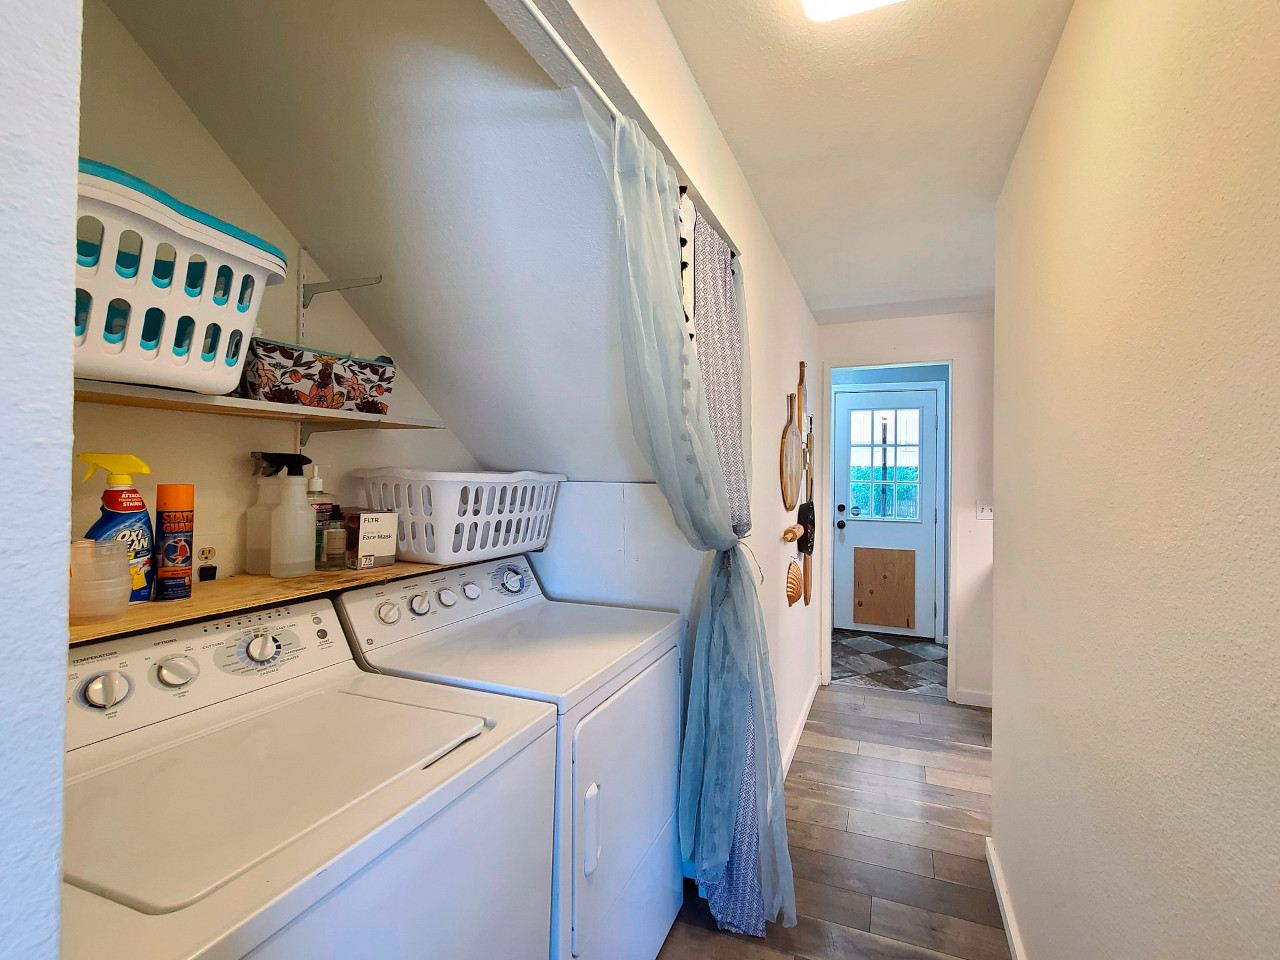 Hide Your Washing Machine and Dryer in an Out-of-the-Way Hallway Nook